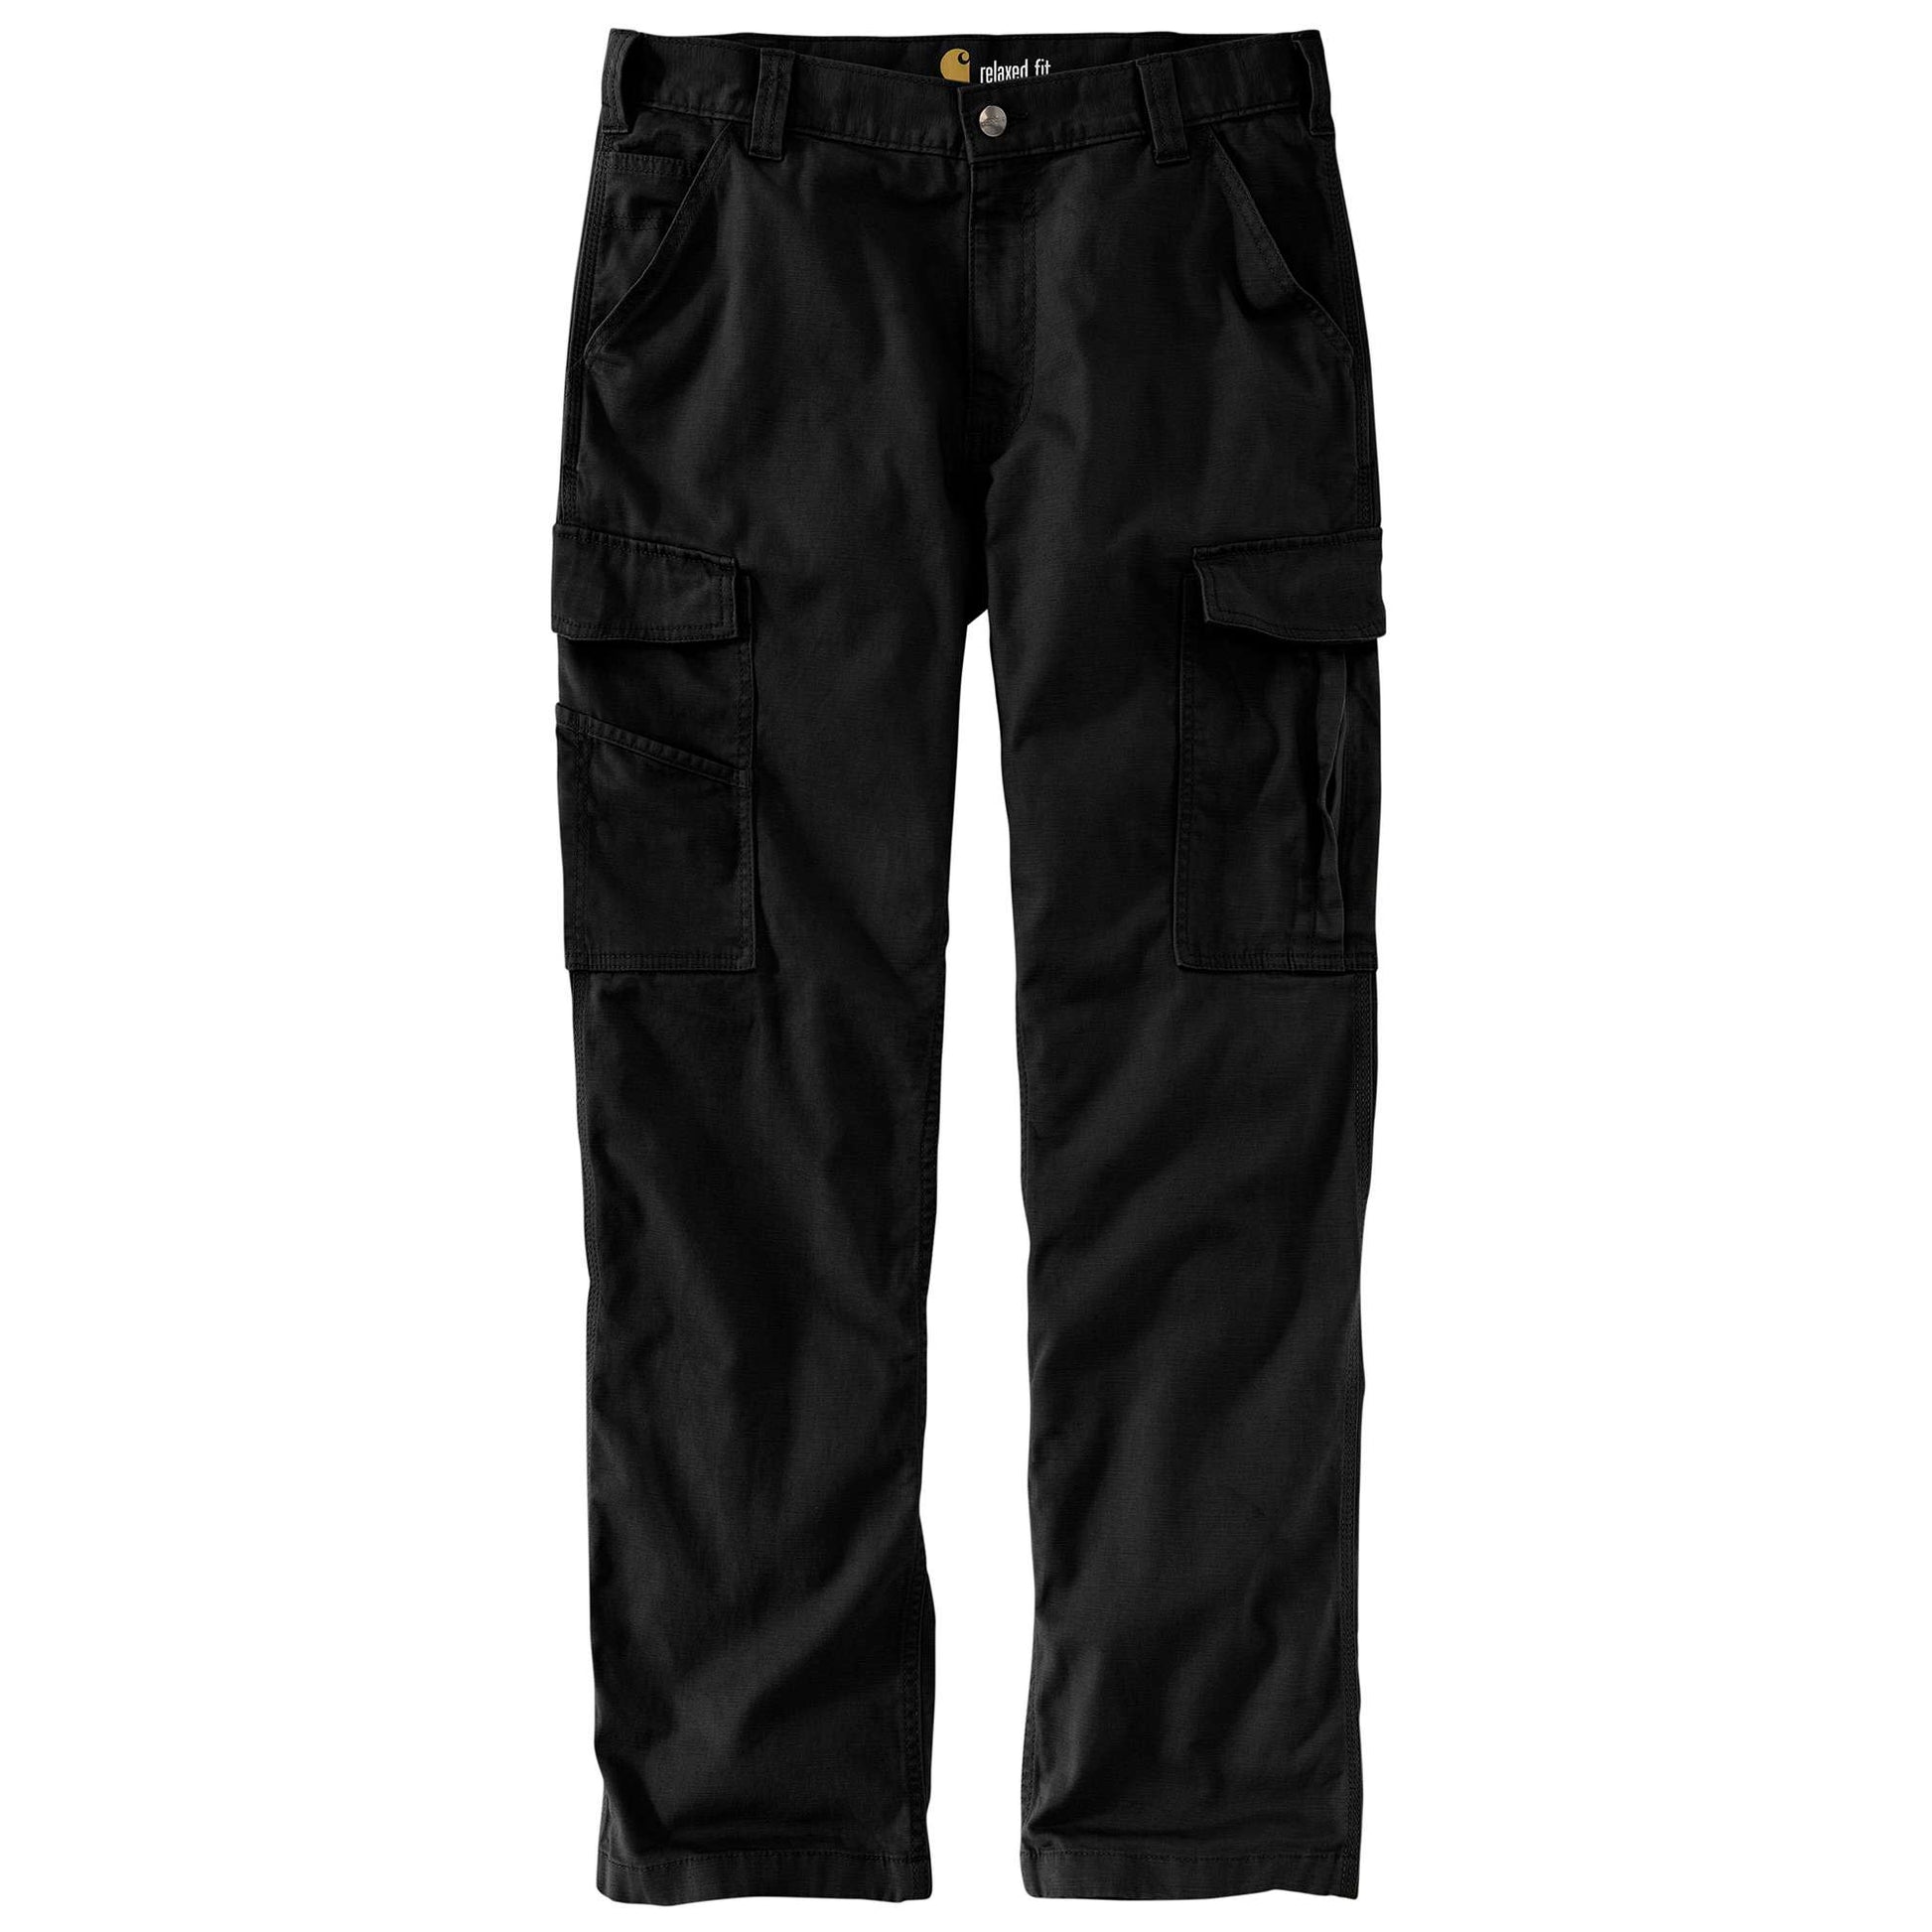 FLEX Relaxed Fit Cargo Pants